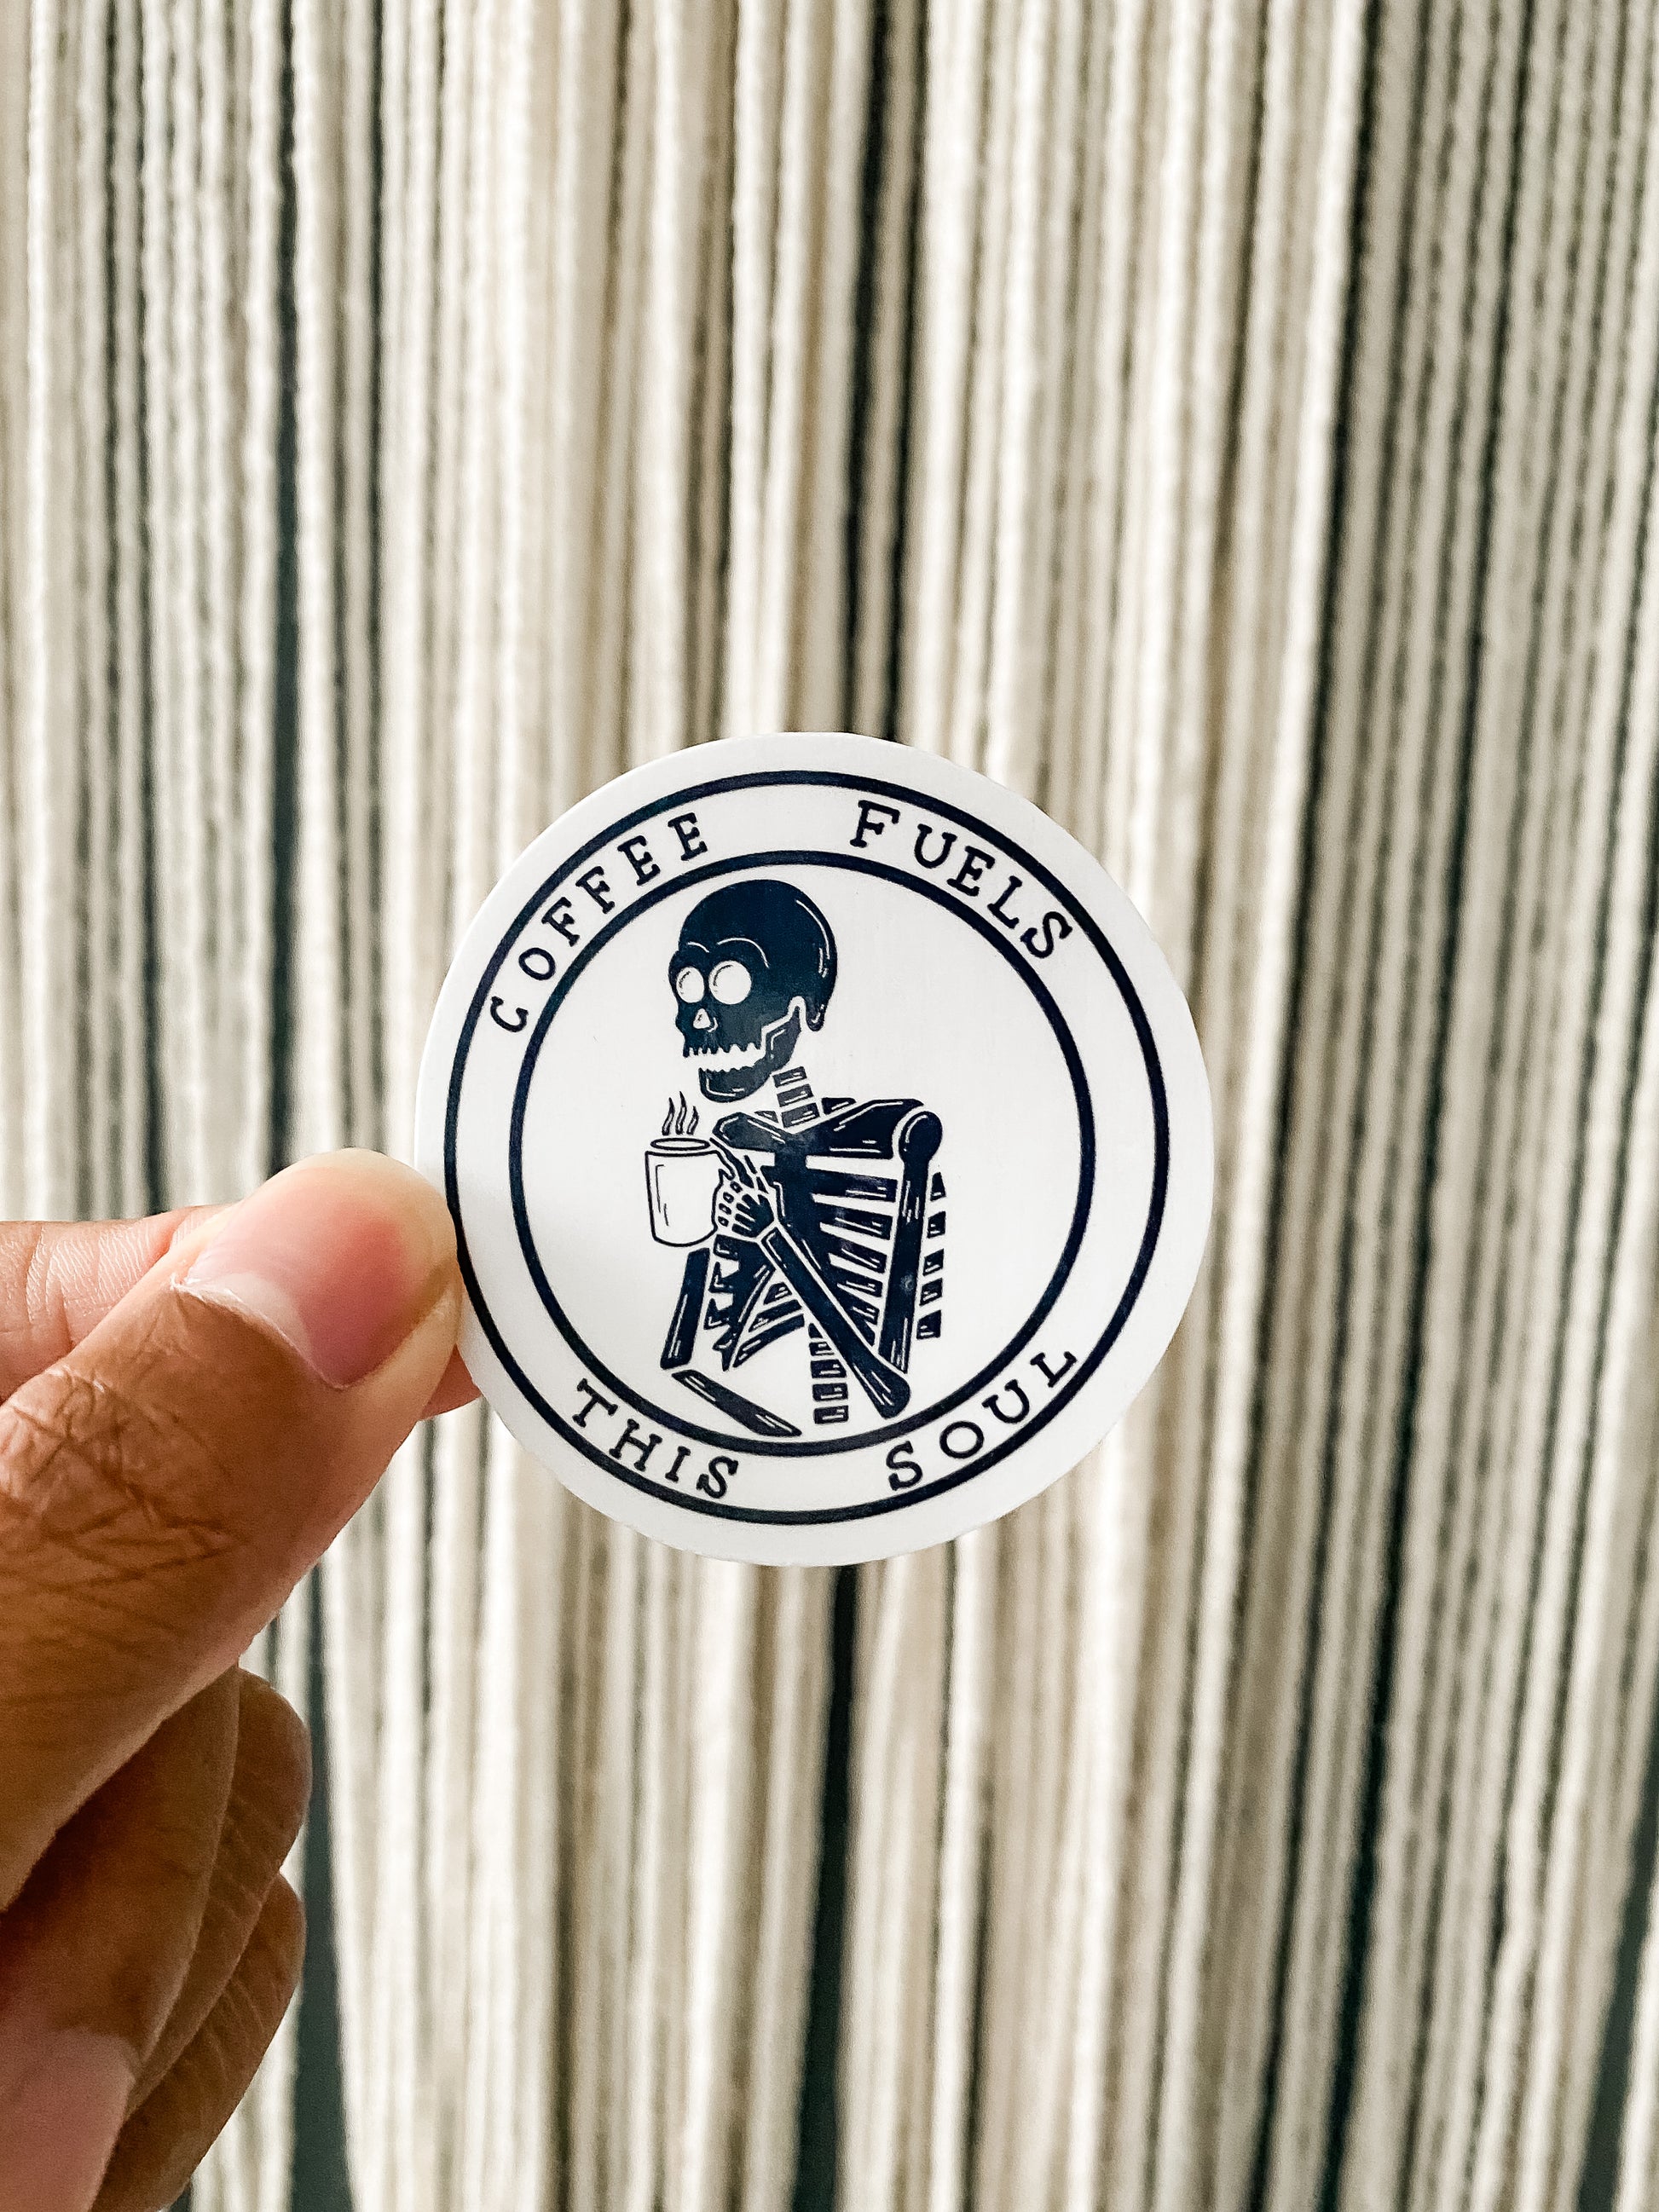 Back and white circle sticker with skeleton holding coffee mug. COFFEE FUELS THIS SOUL around the border